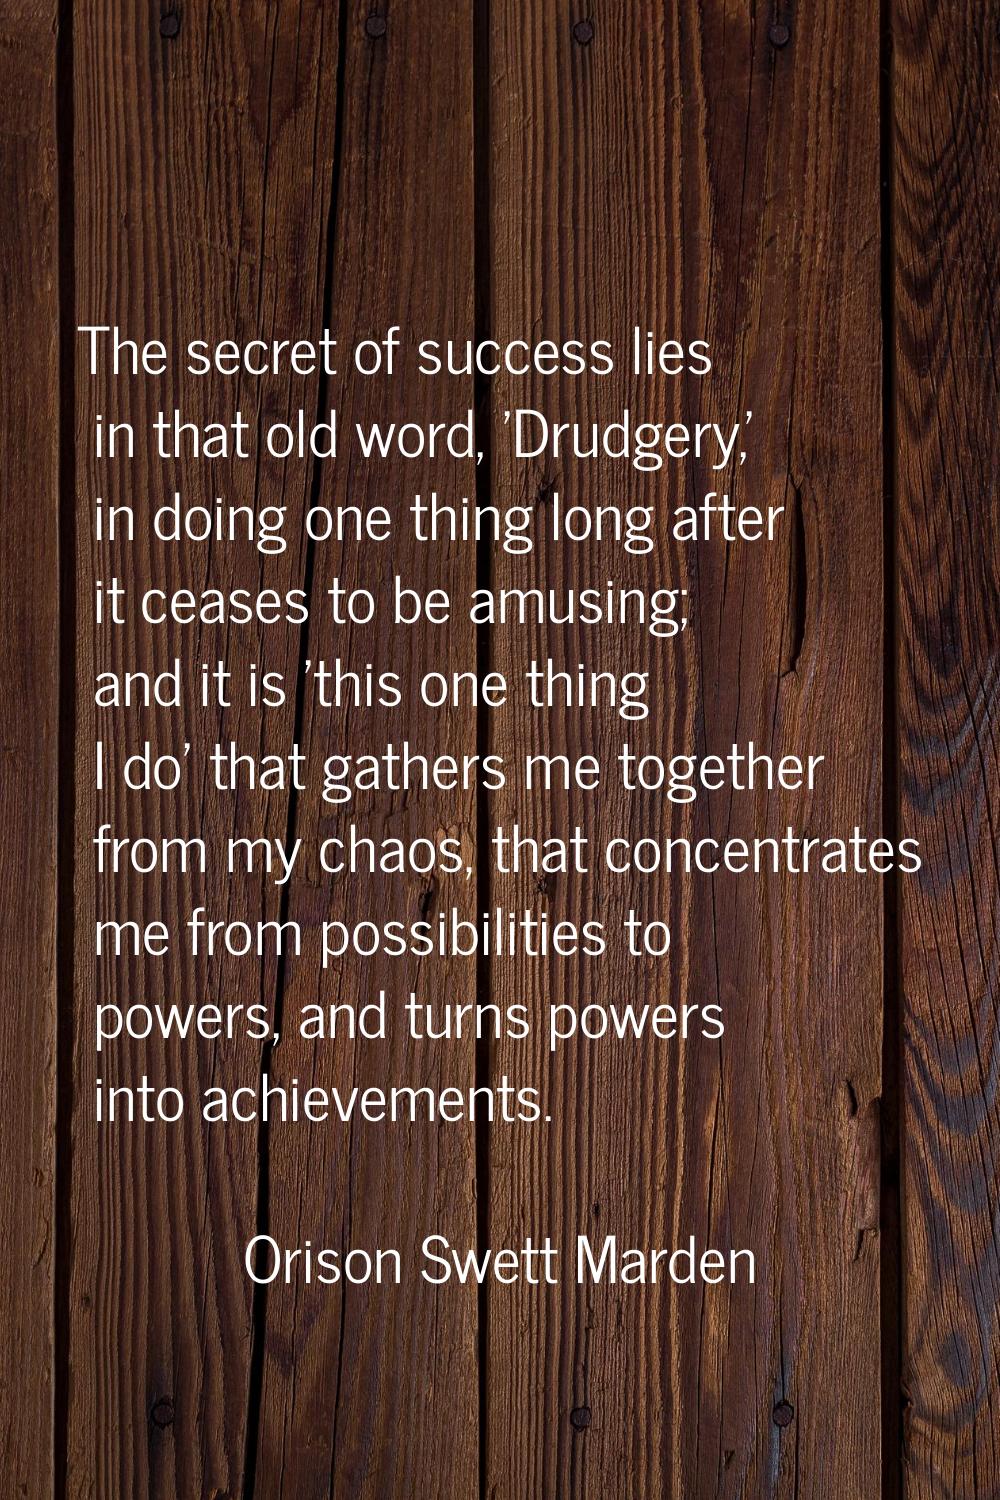 The secret of success lies in that old word, 'Drudgery,' in doing one thing long after it ceases to